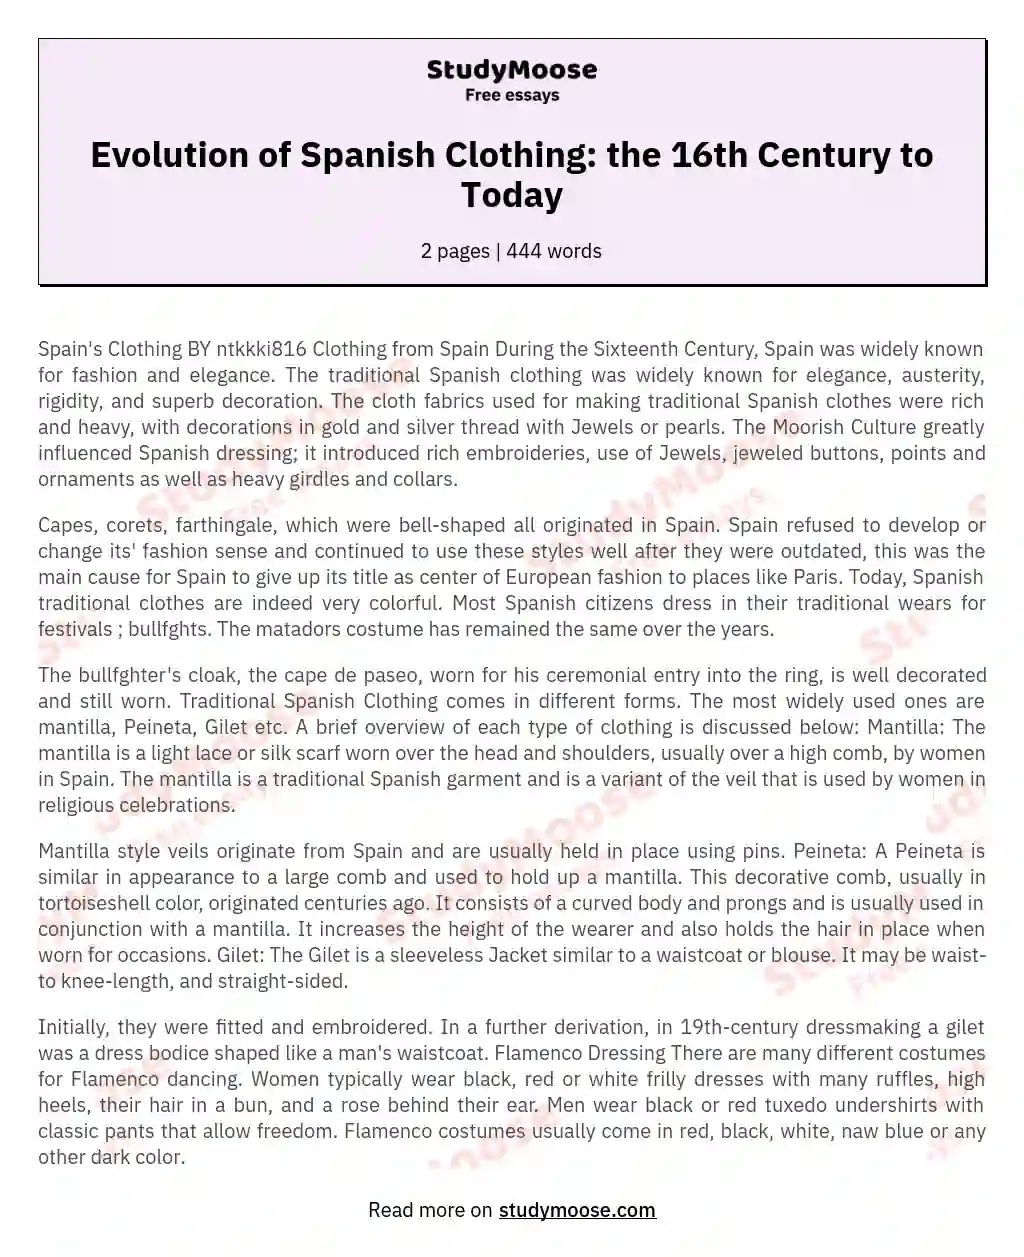 Spain's Clothing